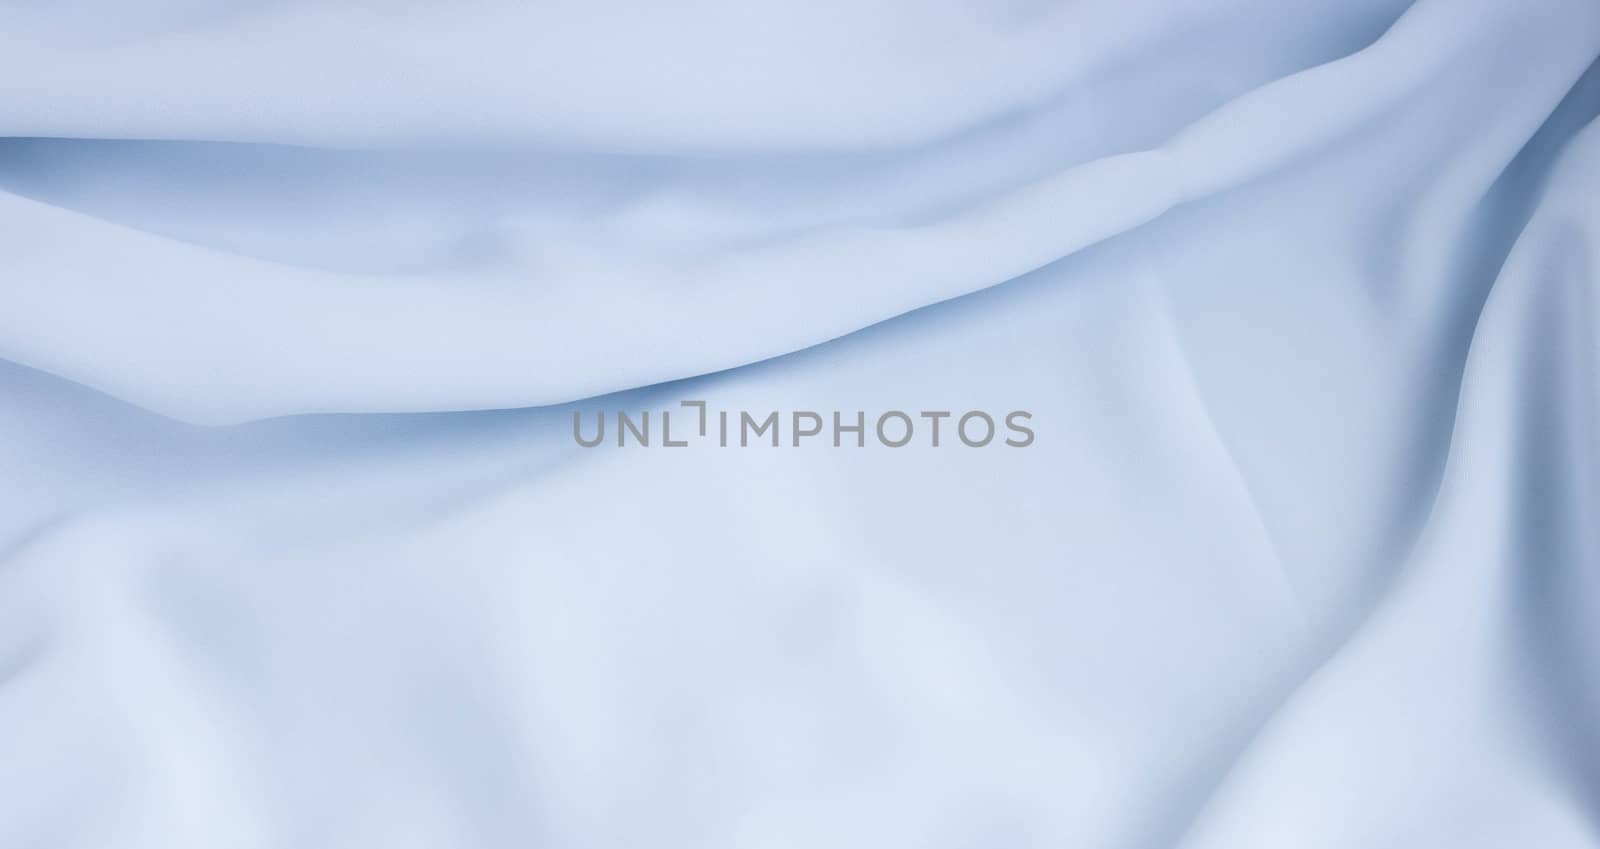 white fabric texture background,crumpled fabric background.